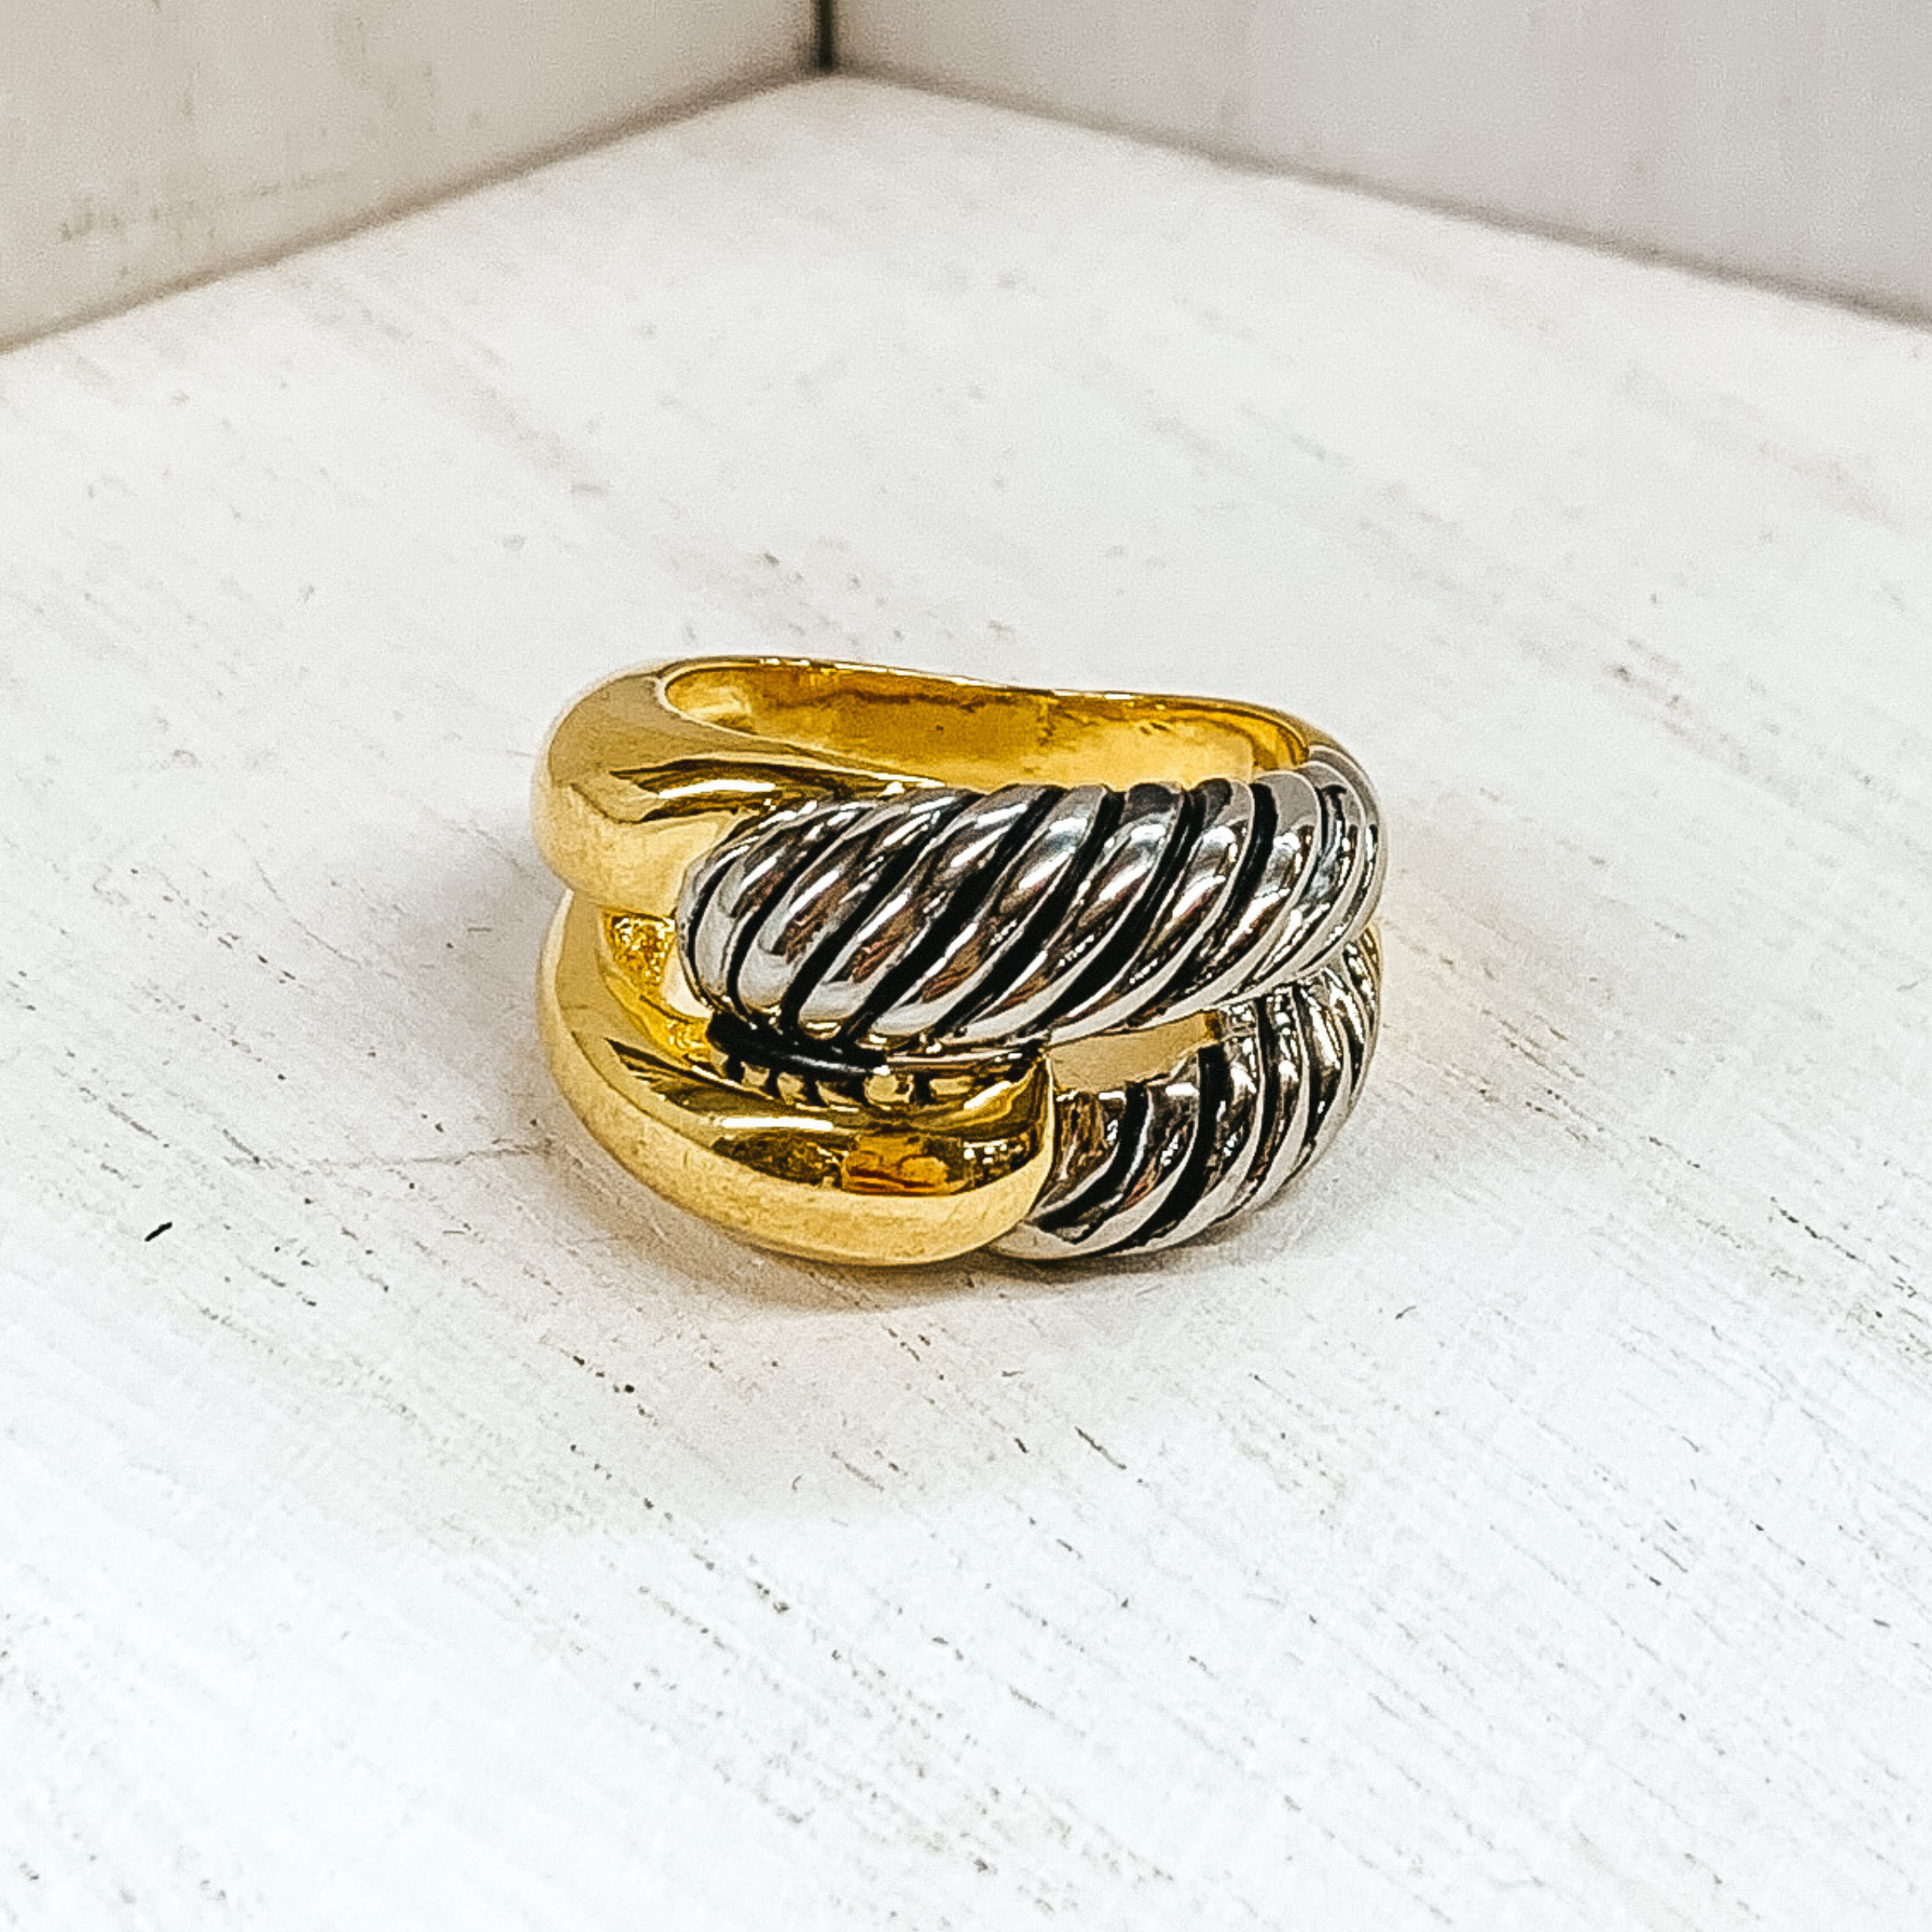 Gold and silver knot ring. The silver part is a twisted design. This ring is pictured on a white background. 